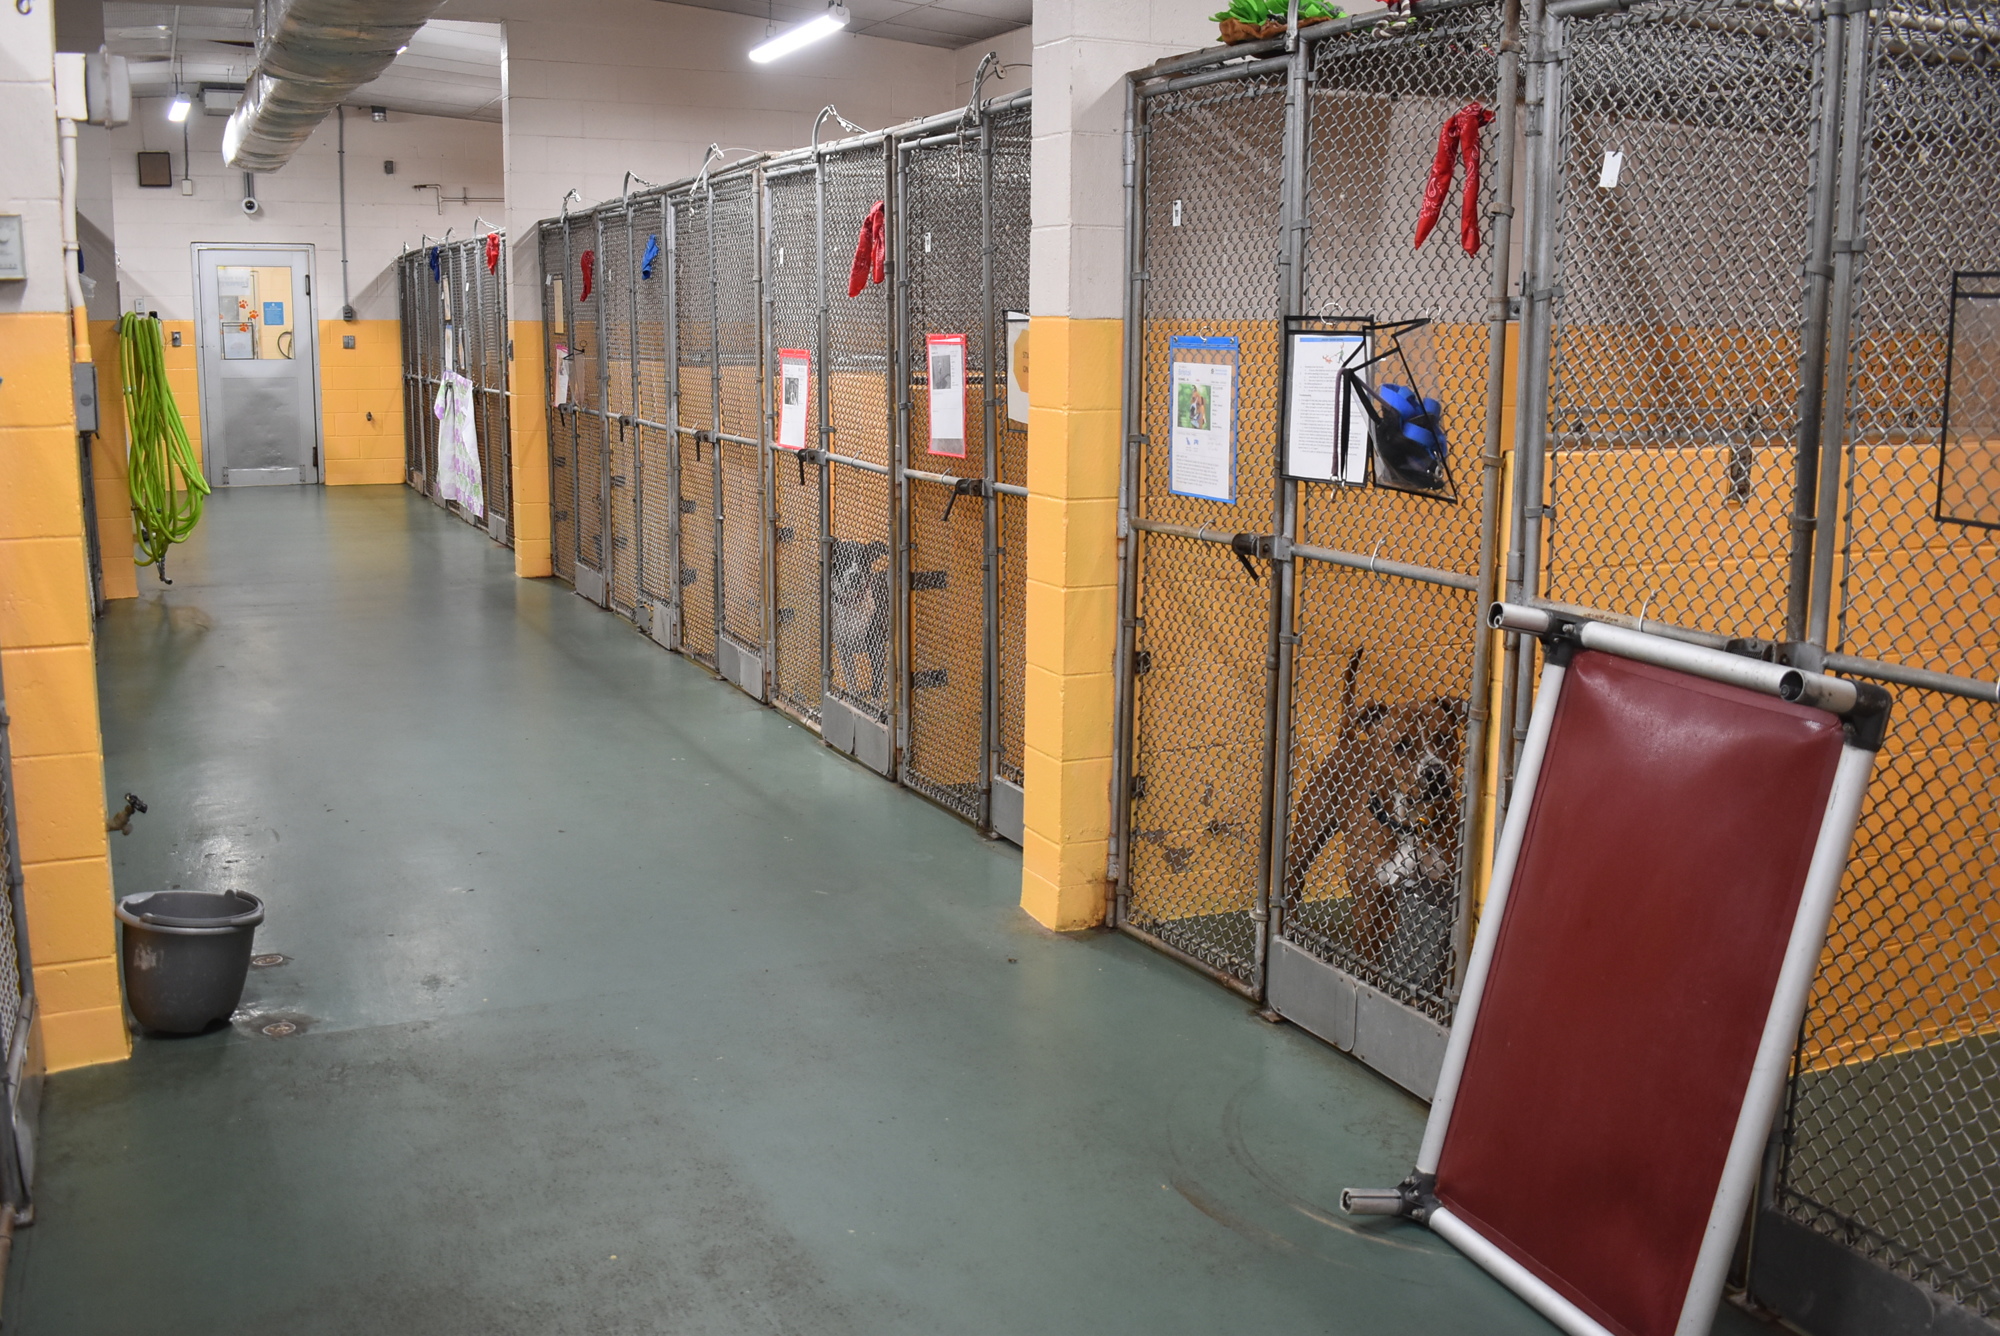 The Manatee County animal shelter has a capacity of about 80 dogs. The shelter has only been slightly above capacity during the COVID-19 pandemic, but has reached as many as 190 dogs in the past.